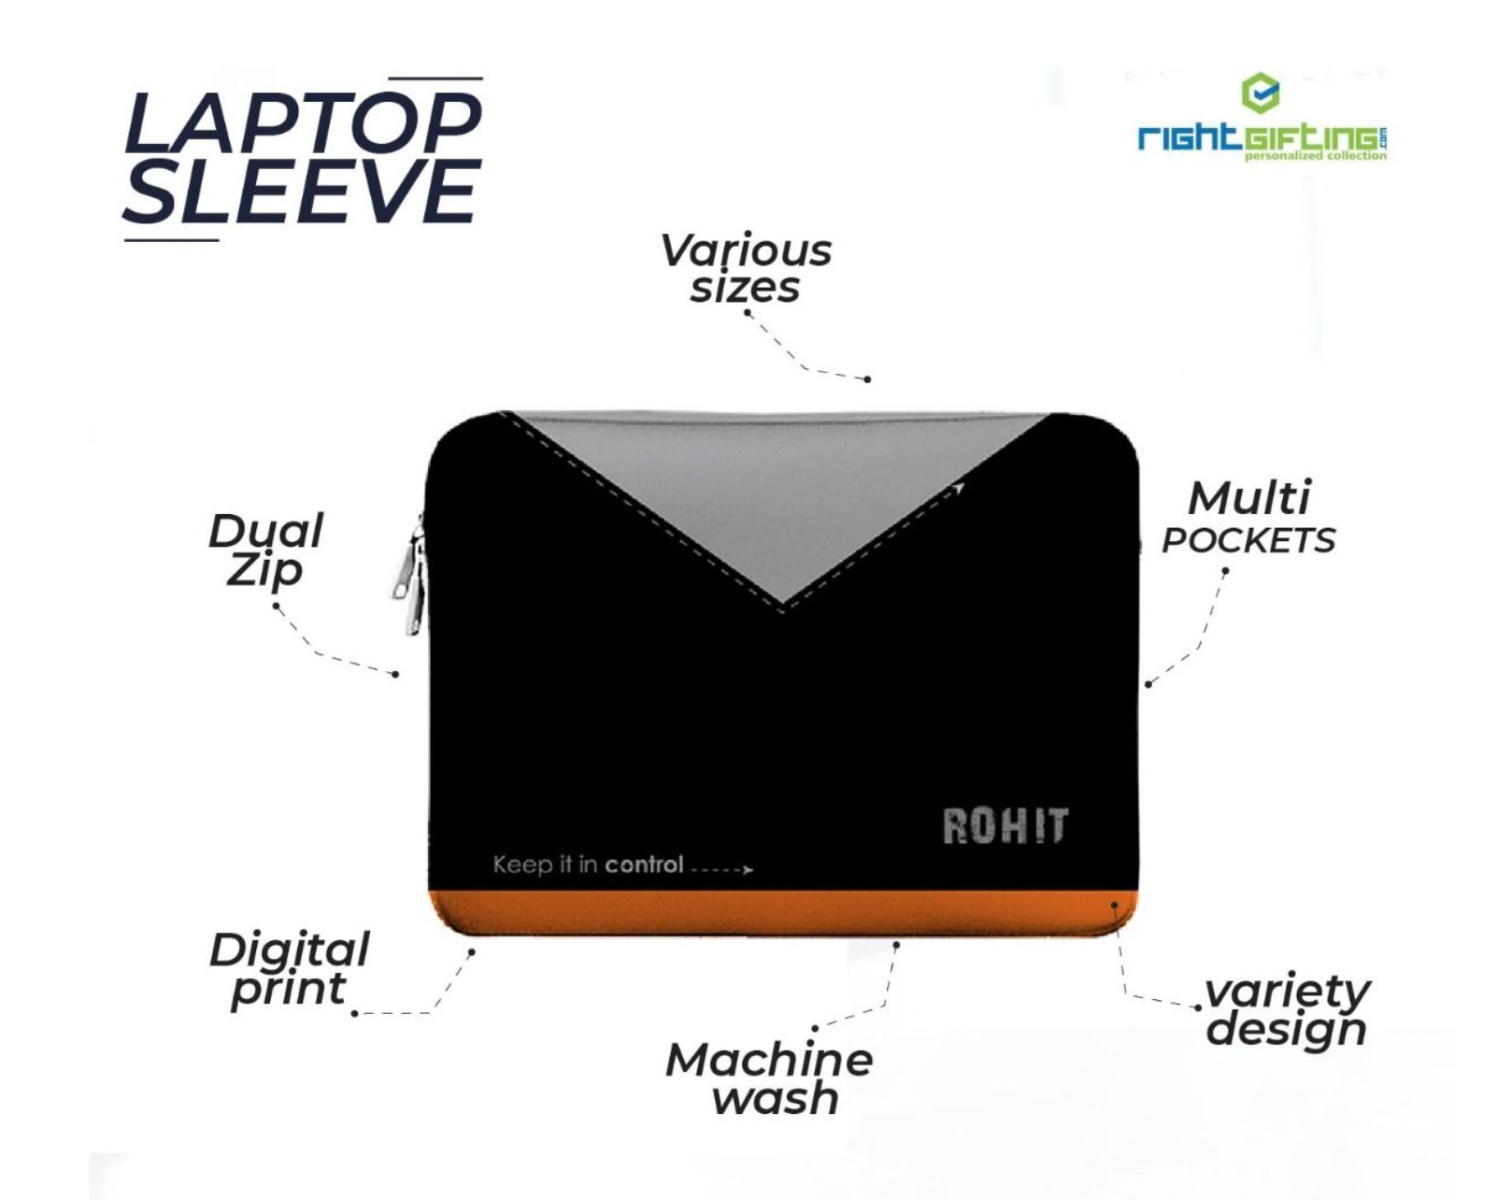 Top Features of Rightgifting Laptop Sleeve